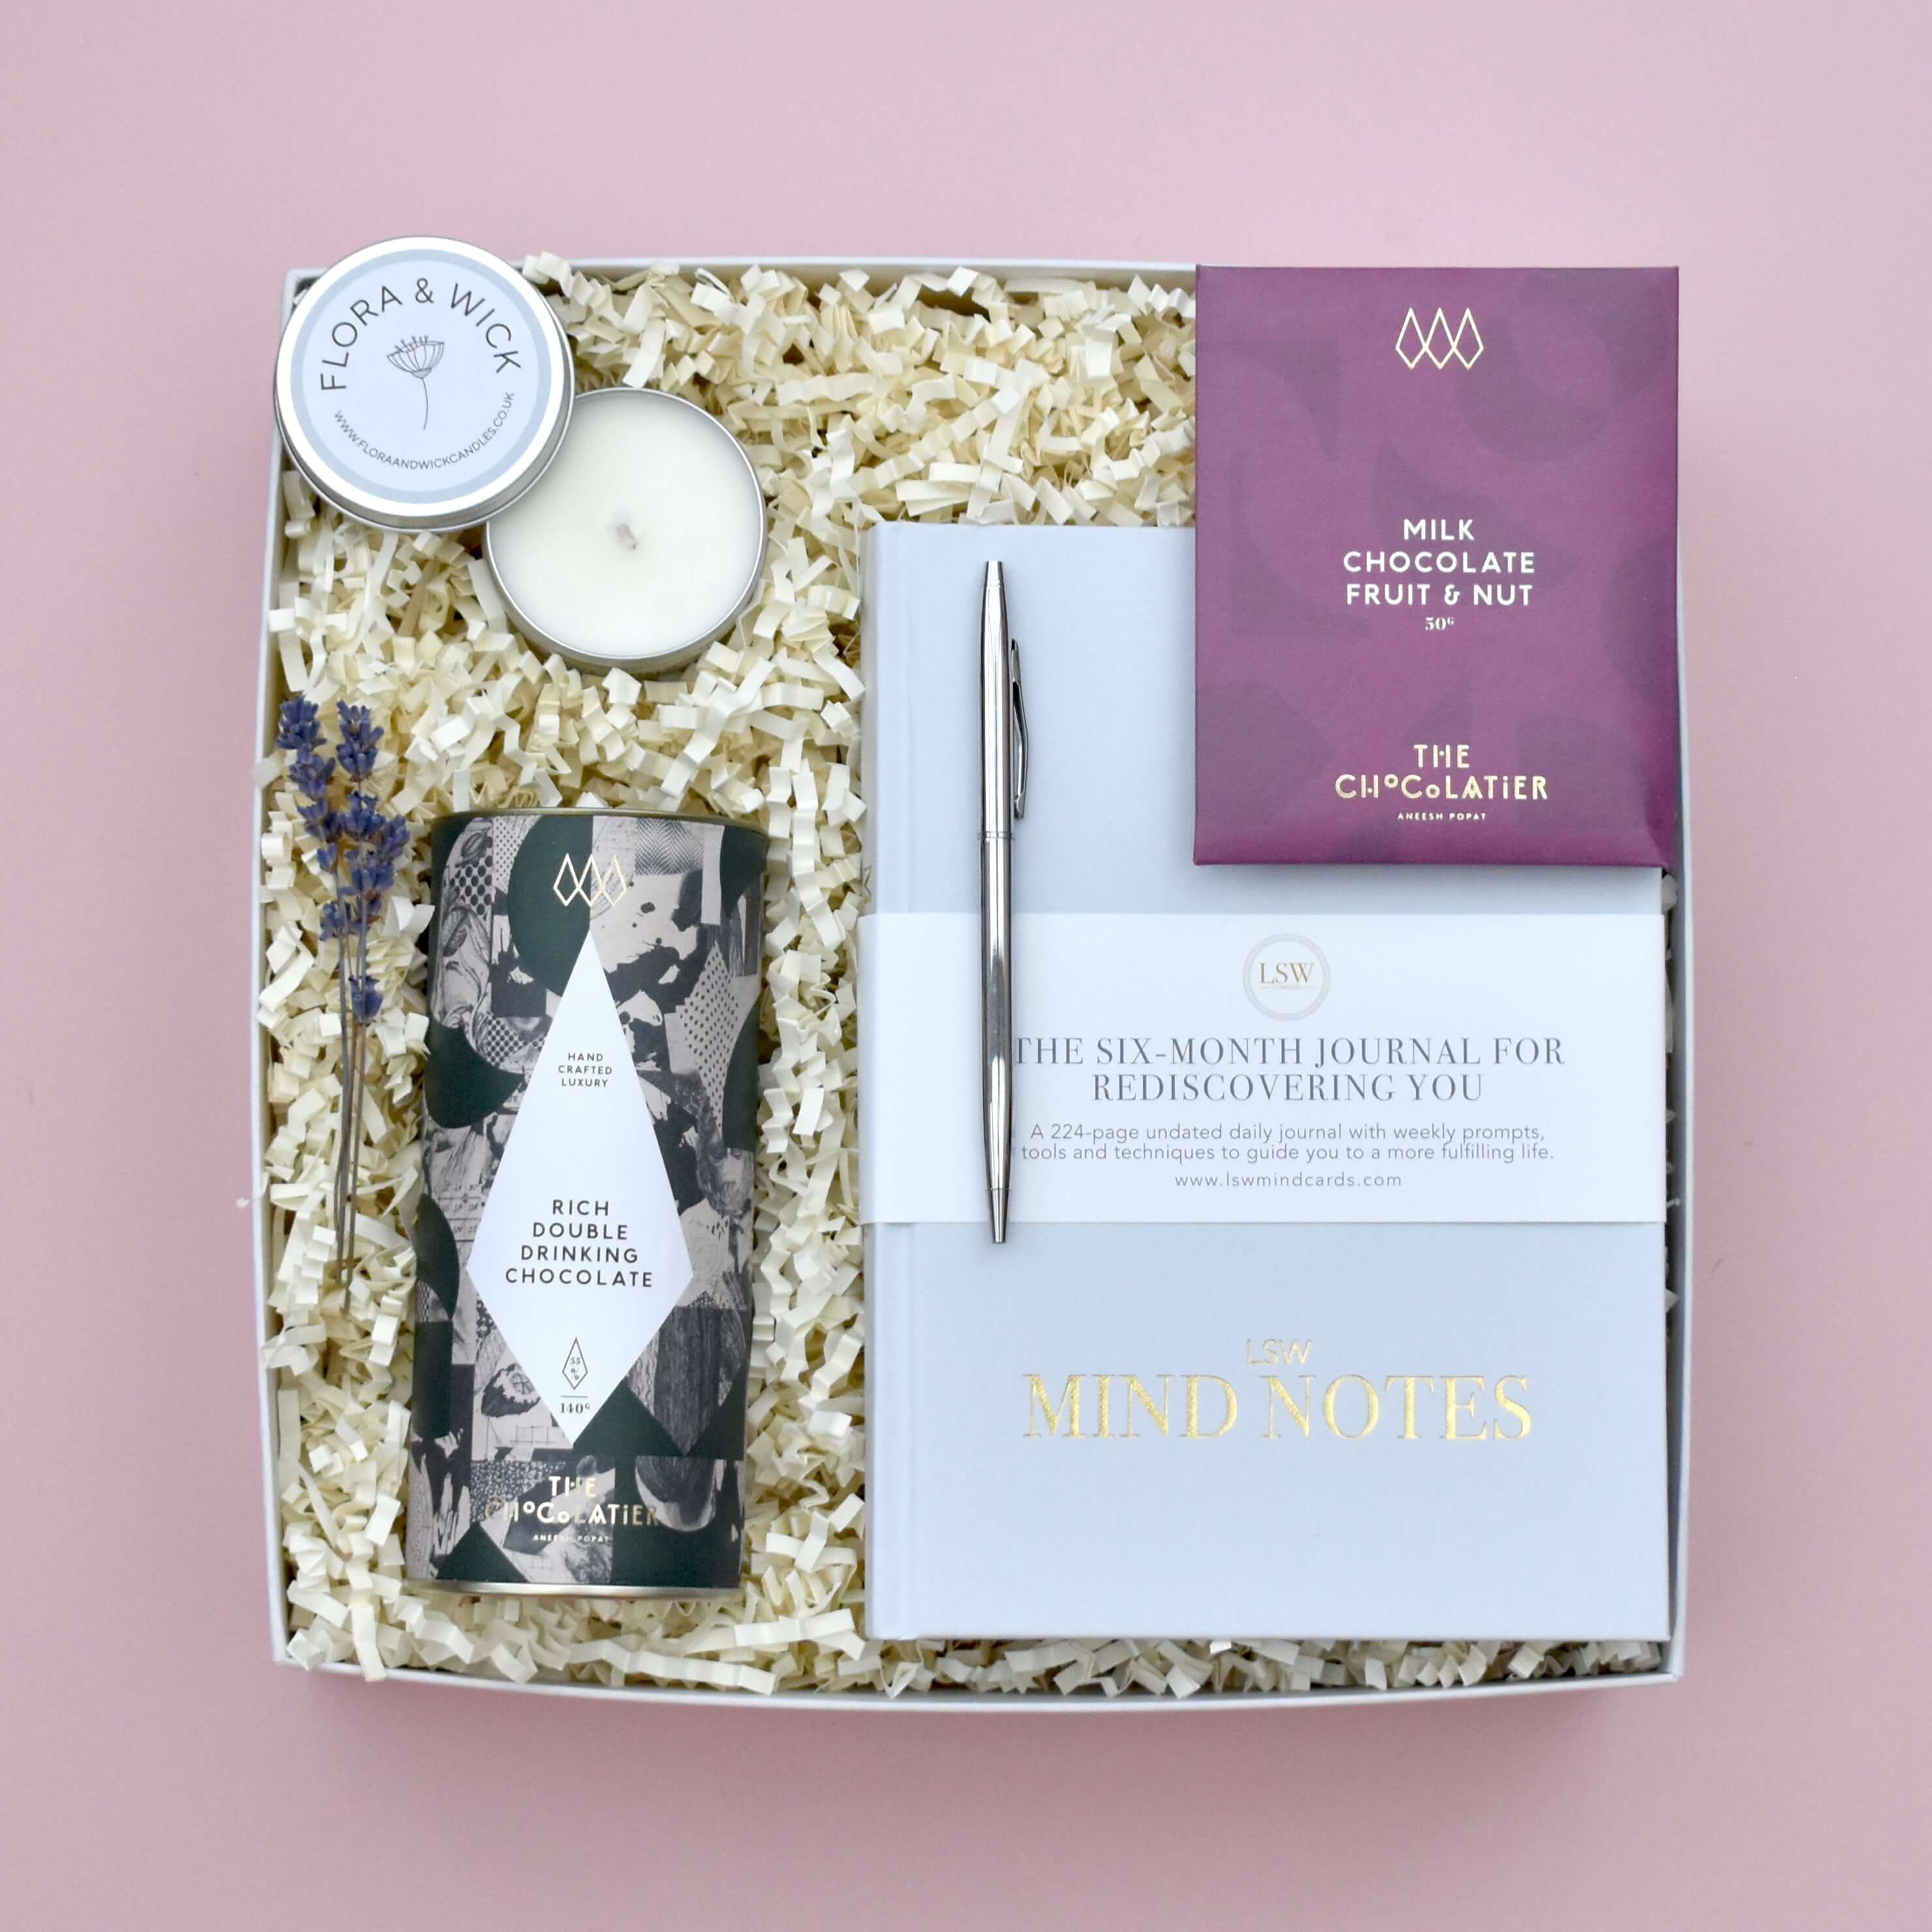 The Affirmations Gift Box